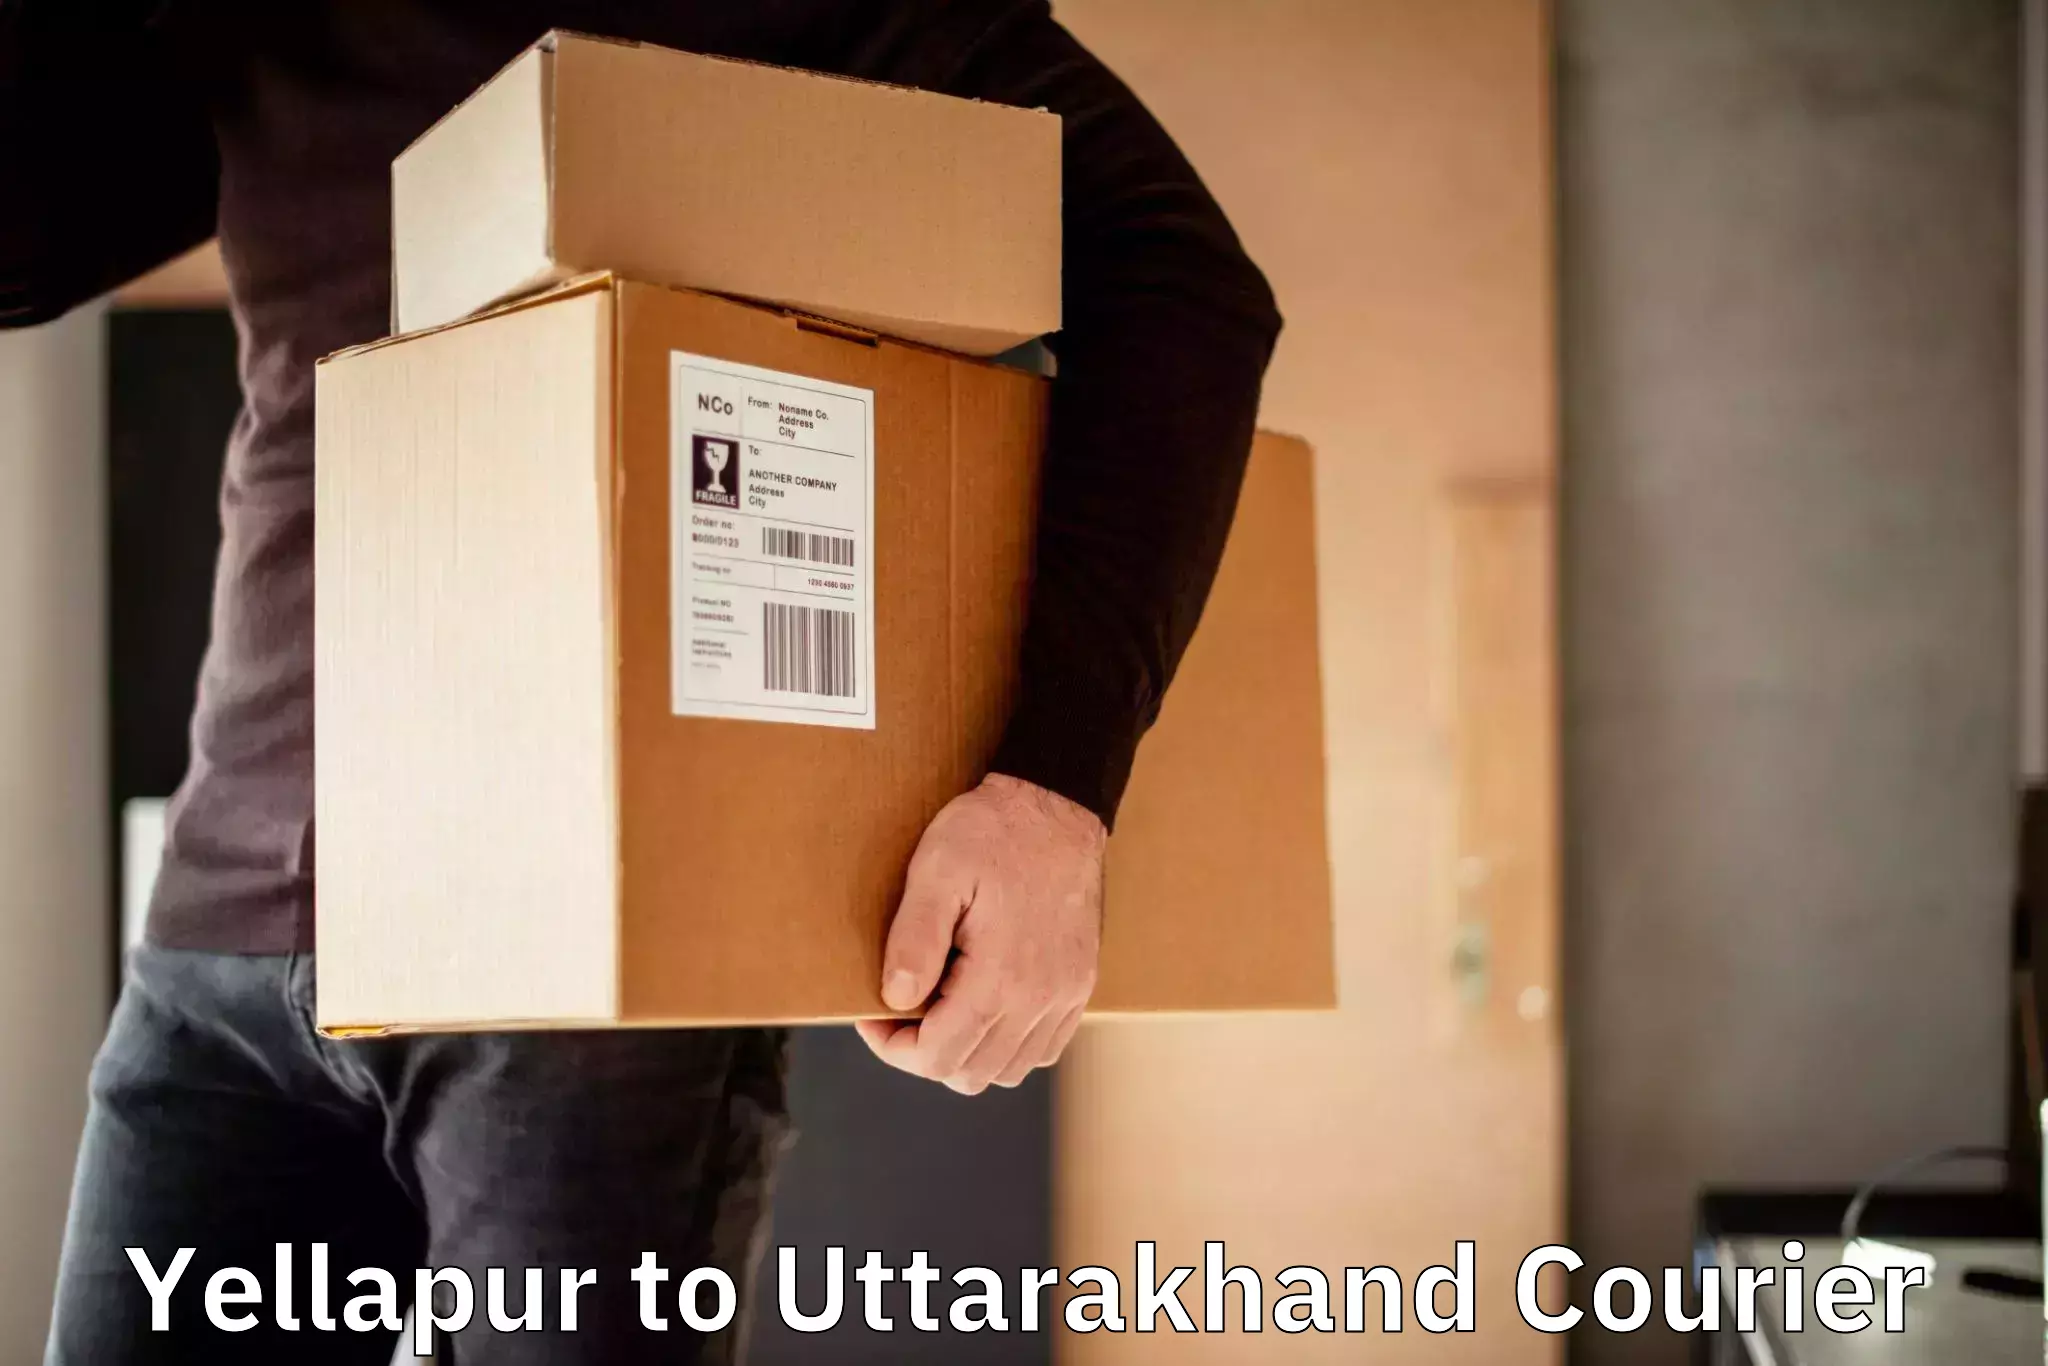 State-of-the-art courier technology Yellapur to Tanakpur